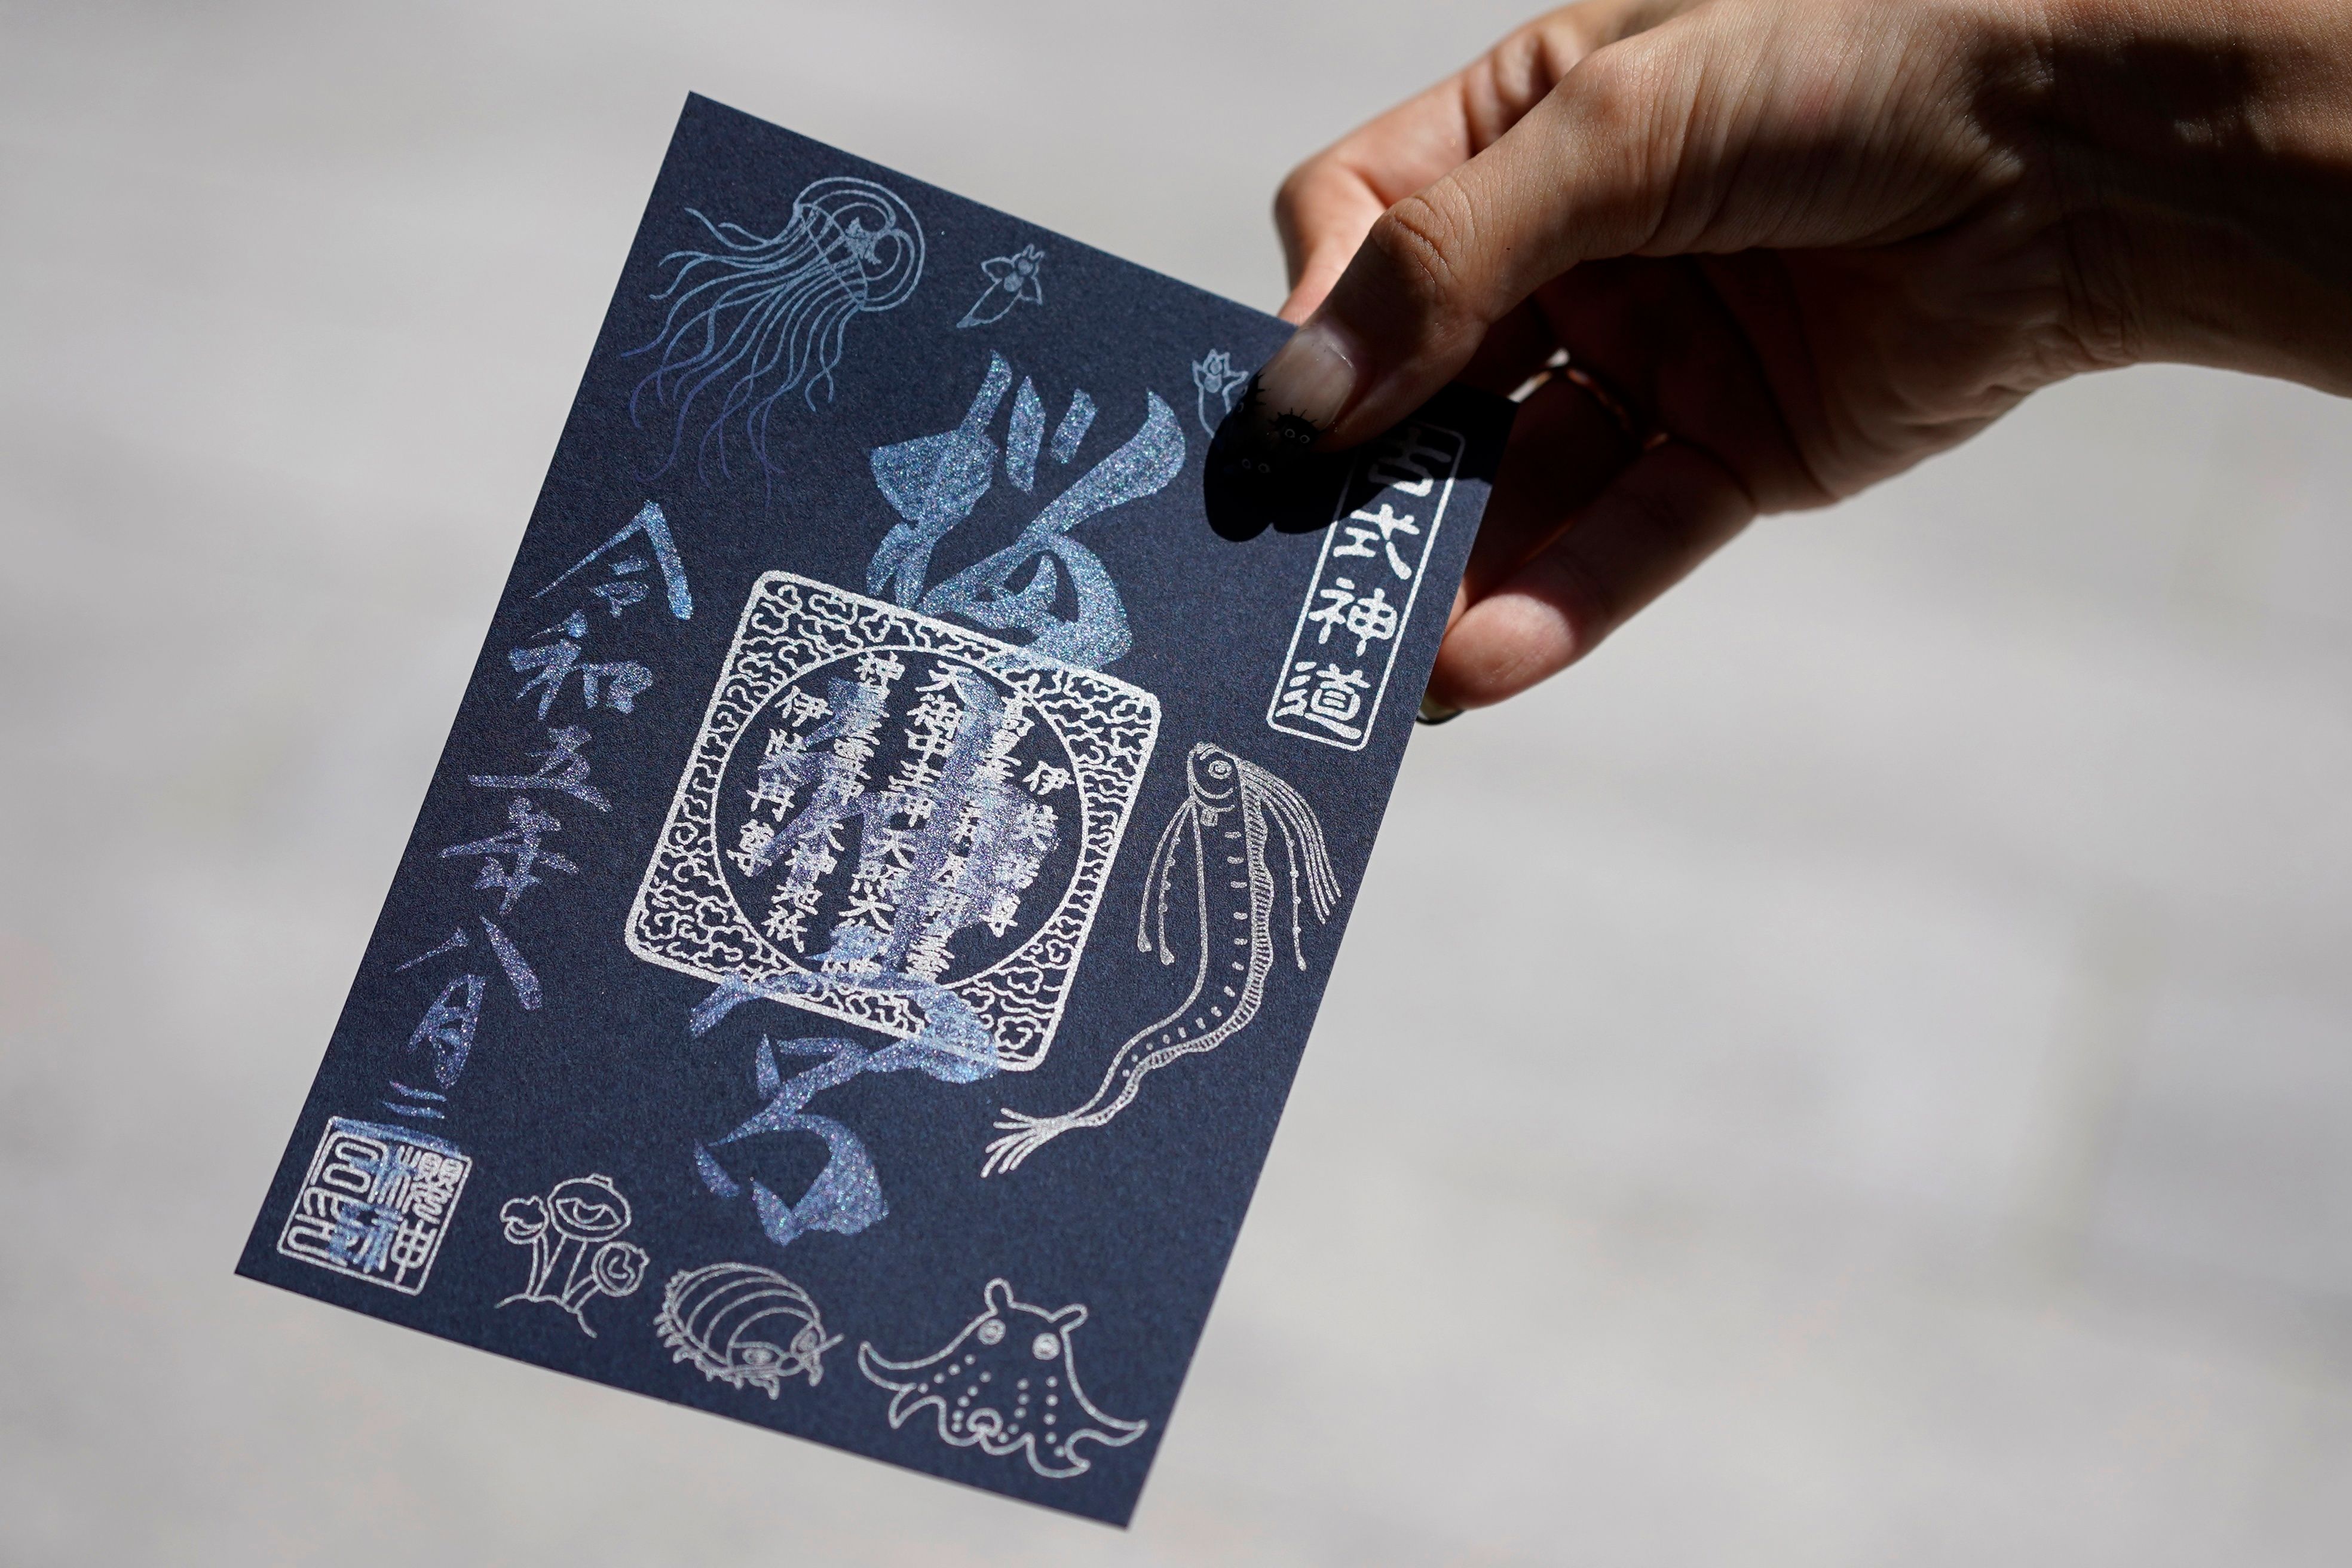 In secular Japan, what draws so many to temples and shrines? Stamp